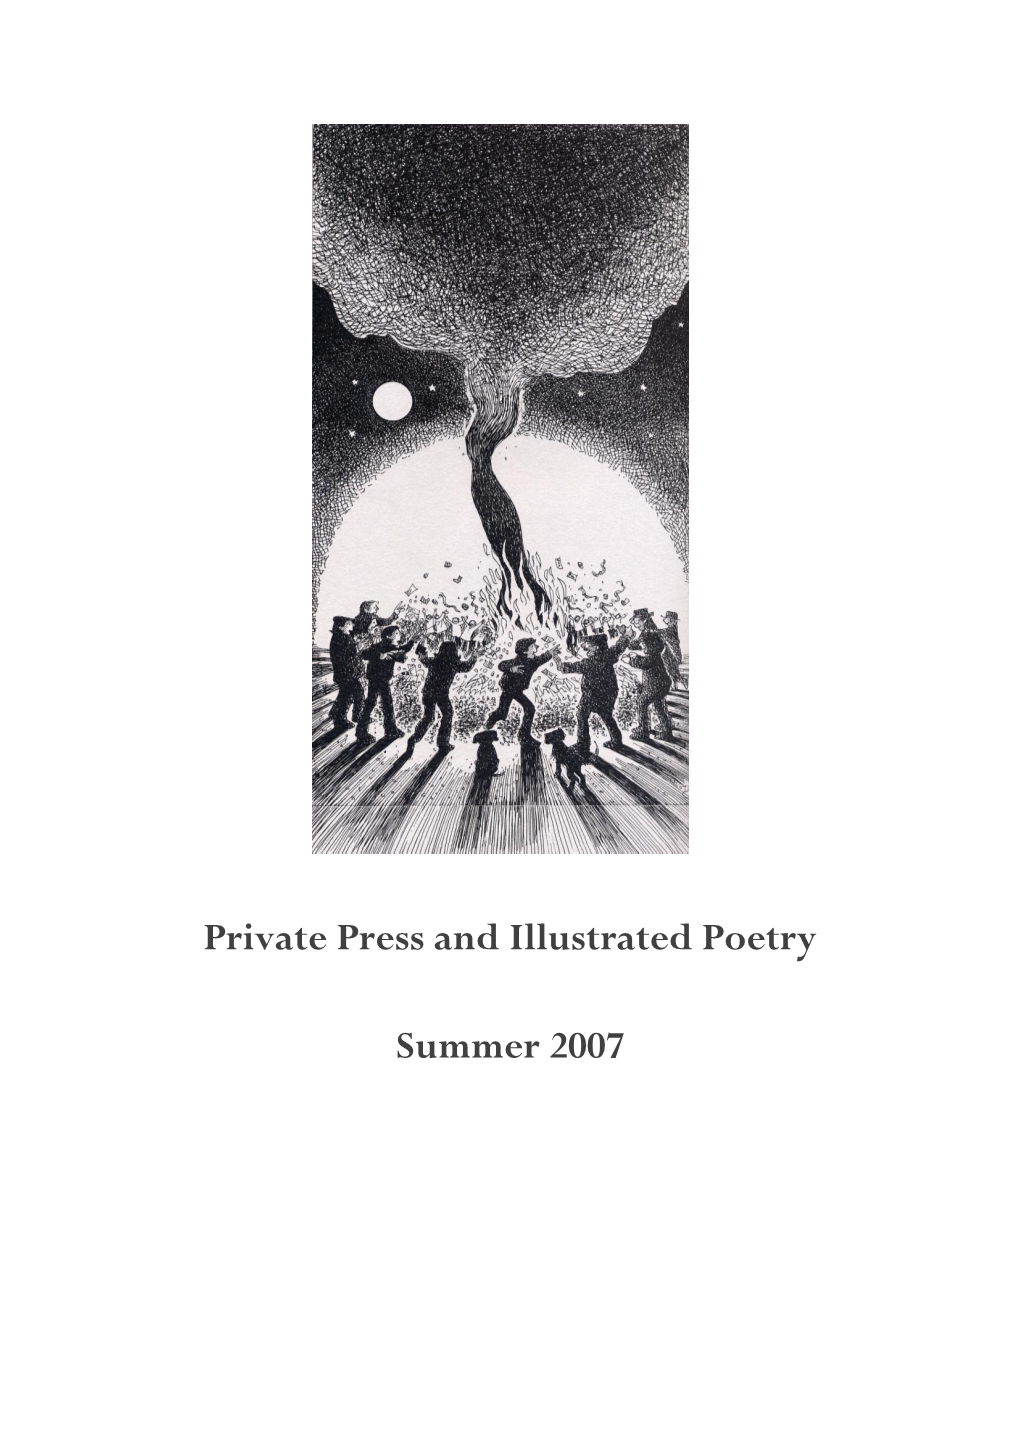 Private Press and Illustrated Poetry Summer 2007